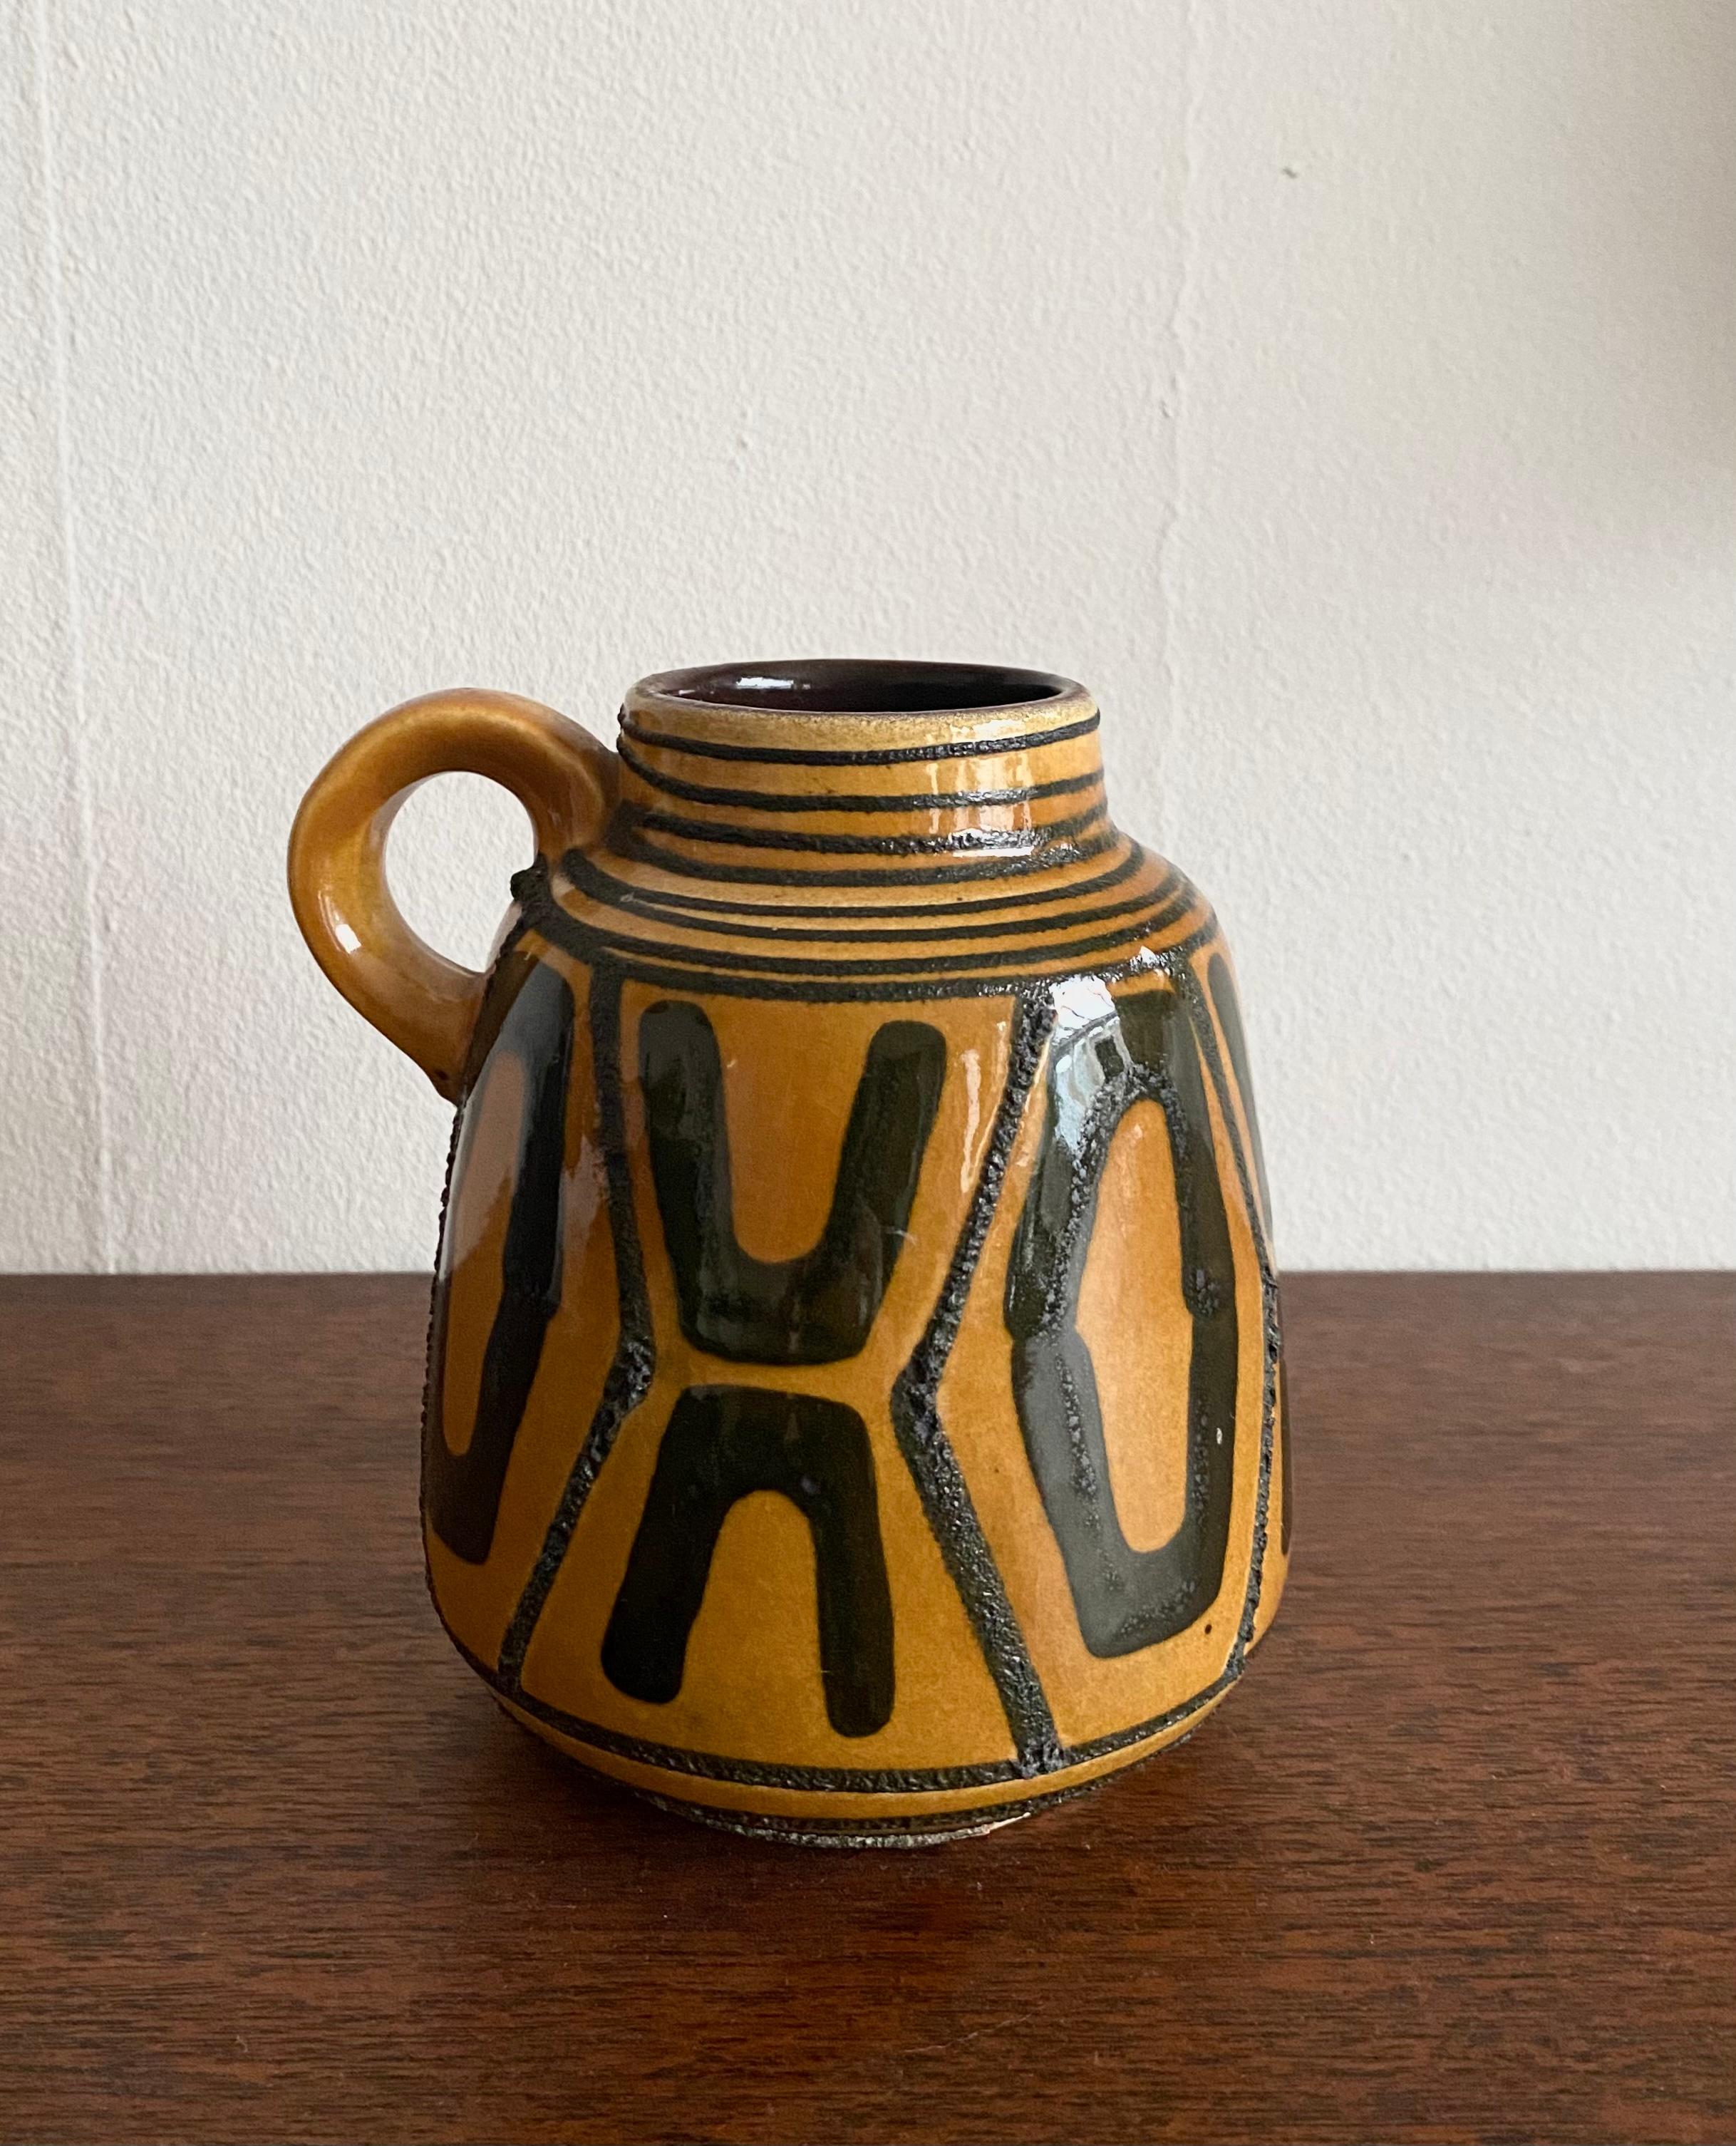 Lovely small West Germany ceramic jug / vase, 1535-13 with rare black and Honey colored decoration and some fatlava components. The piece is in very good condition.